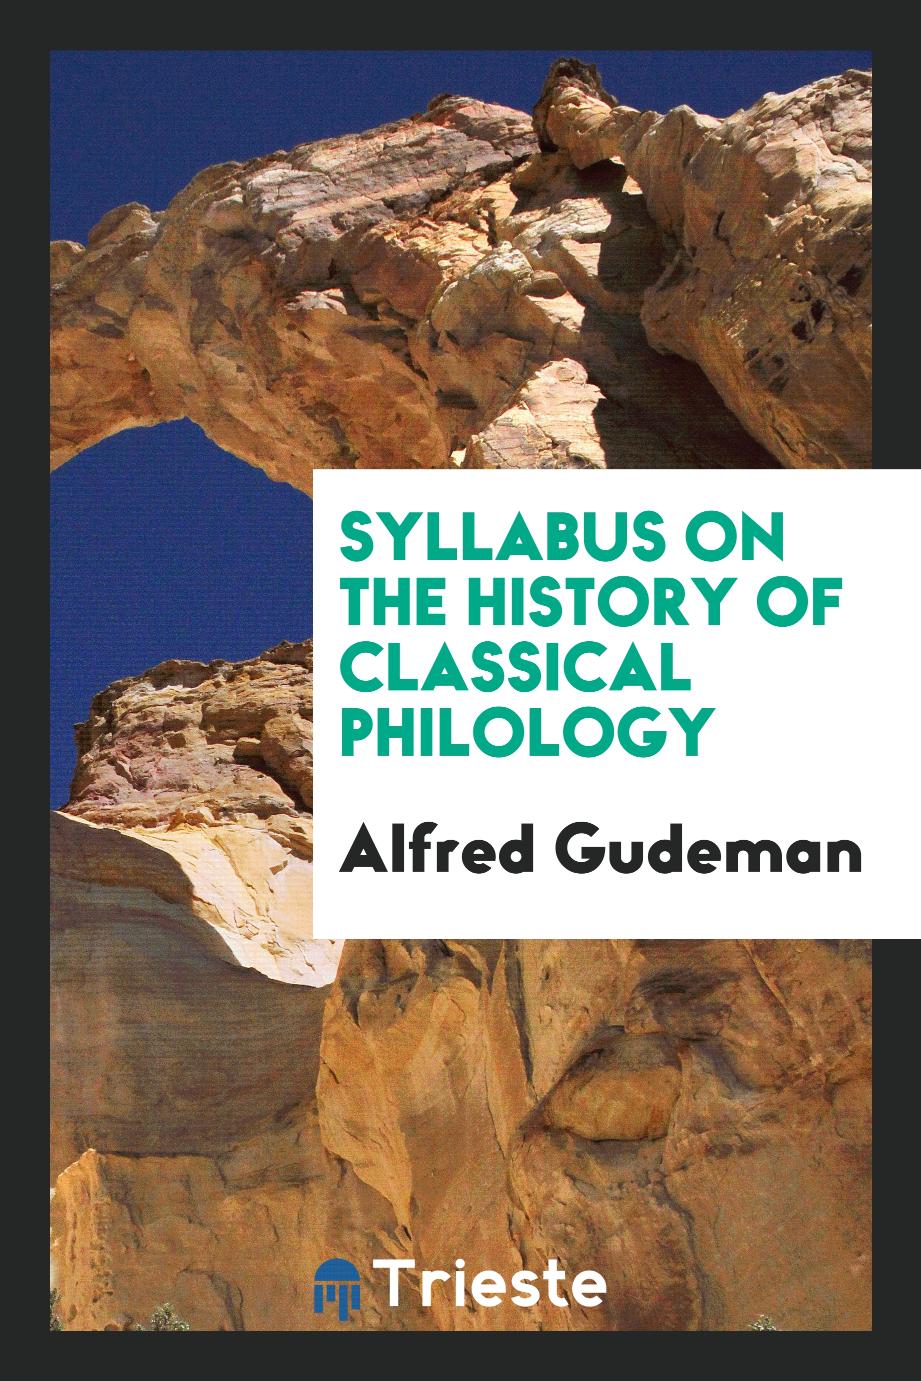 Syllabus on the History of Classical Philology